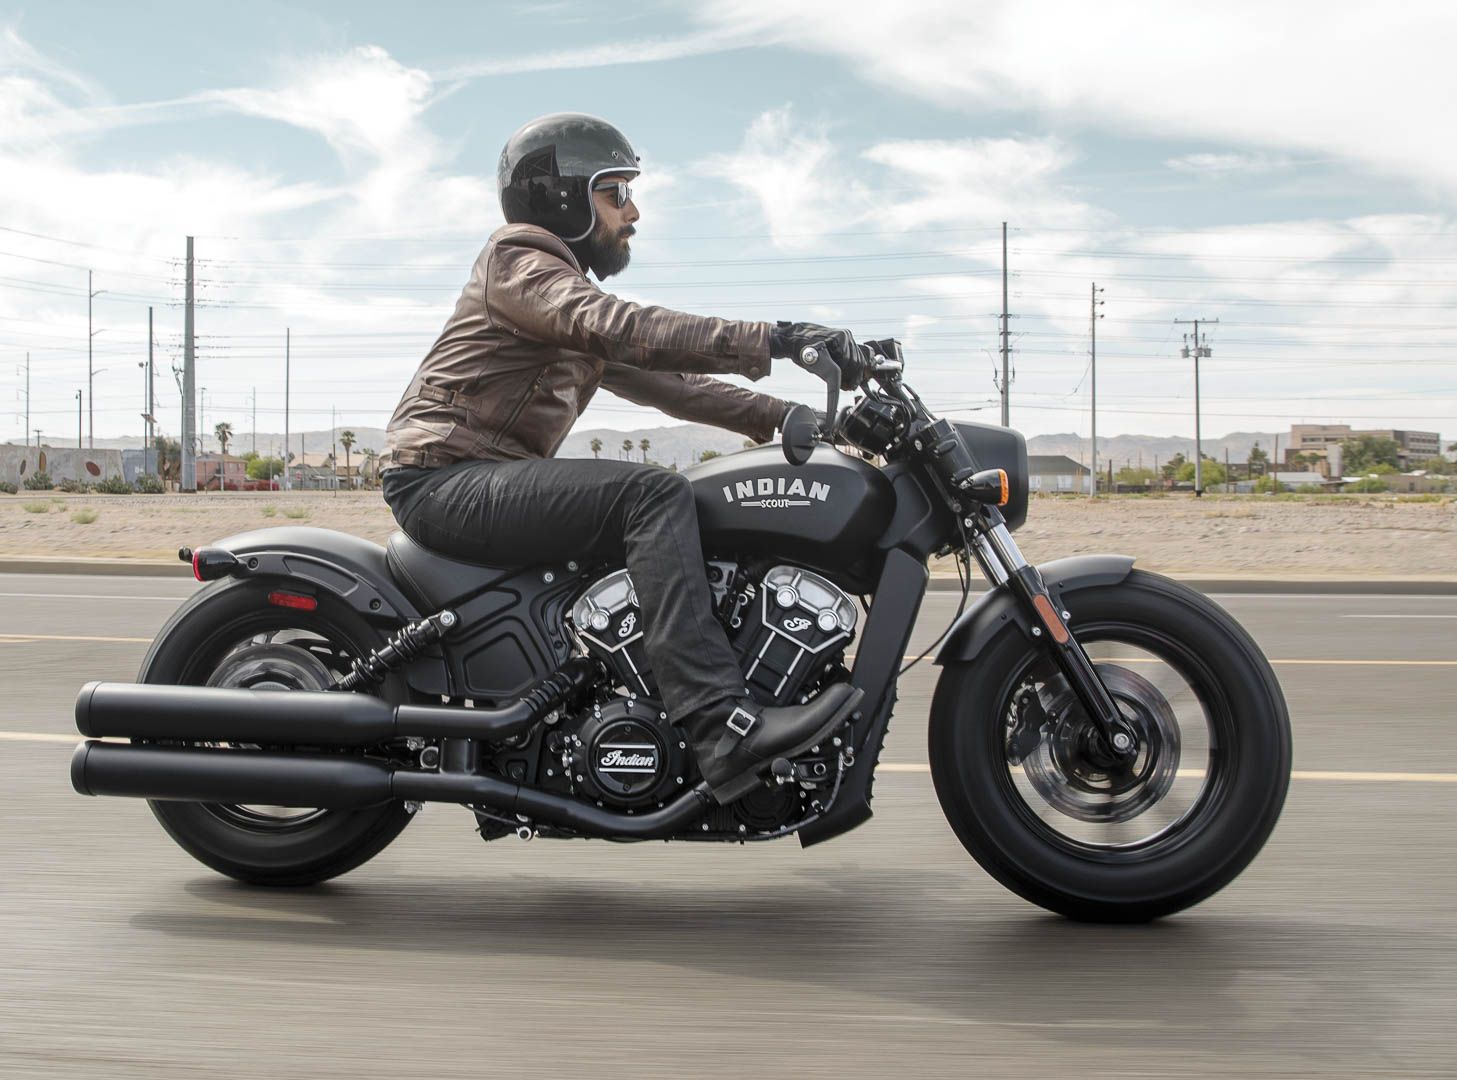 Indian Scout Lineup First Look: Prices, Colors, and Photo